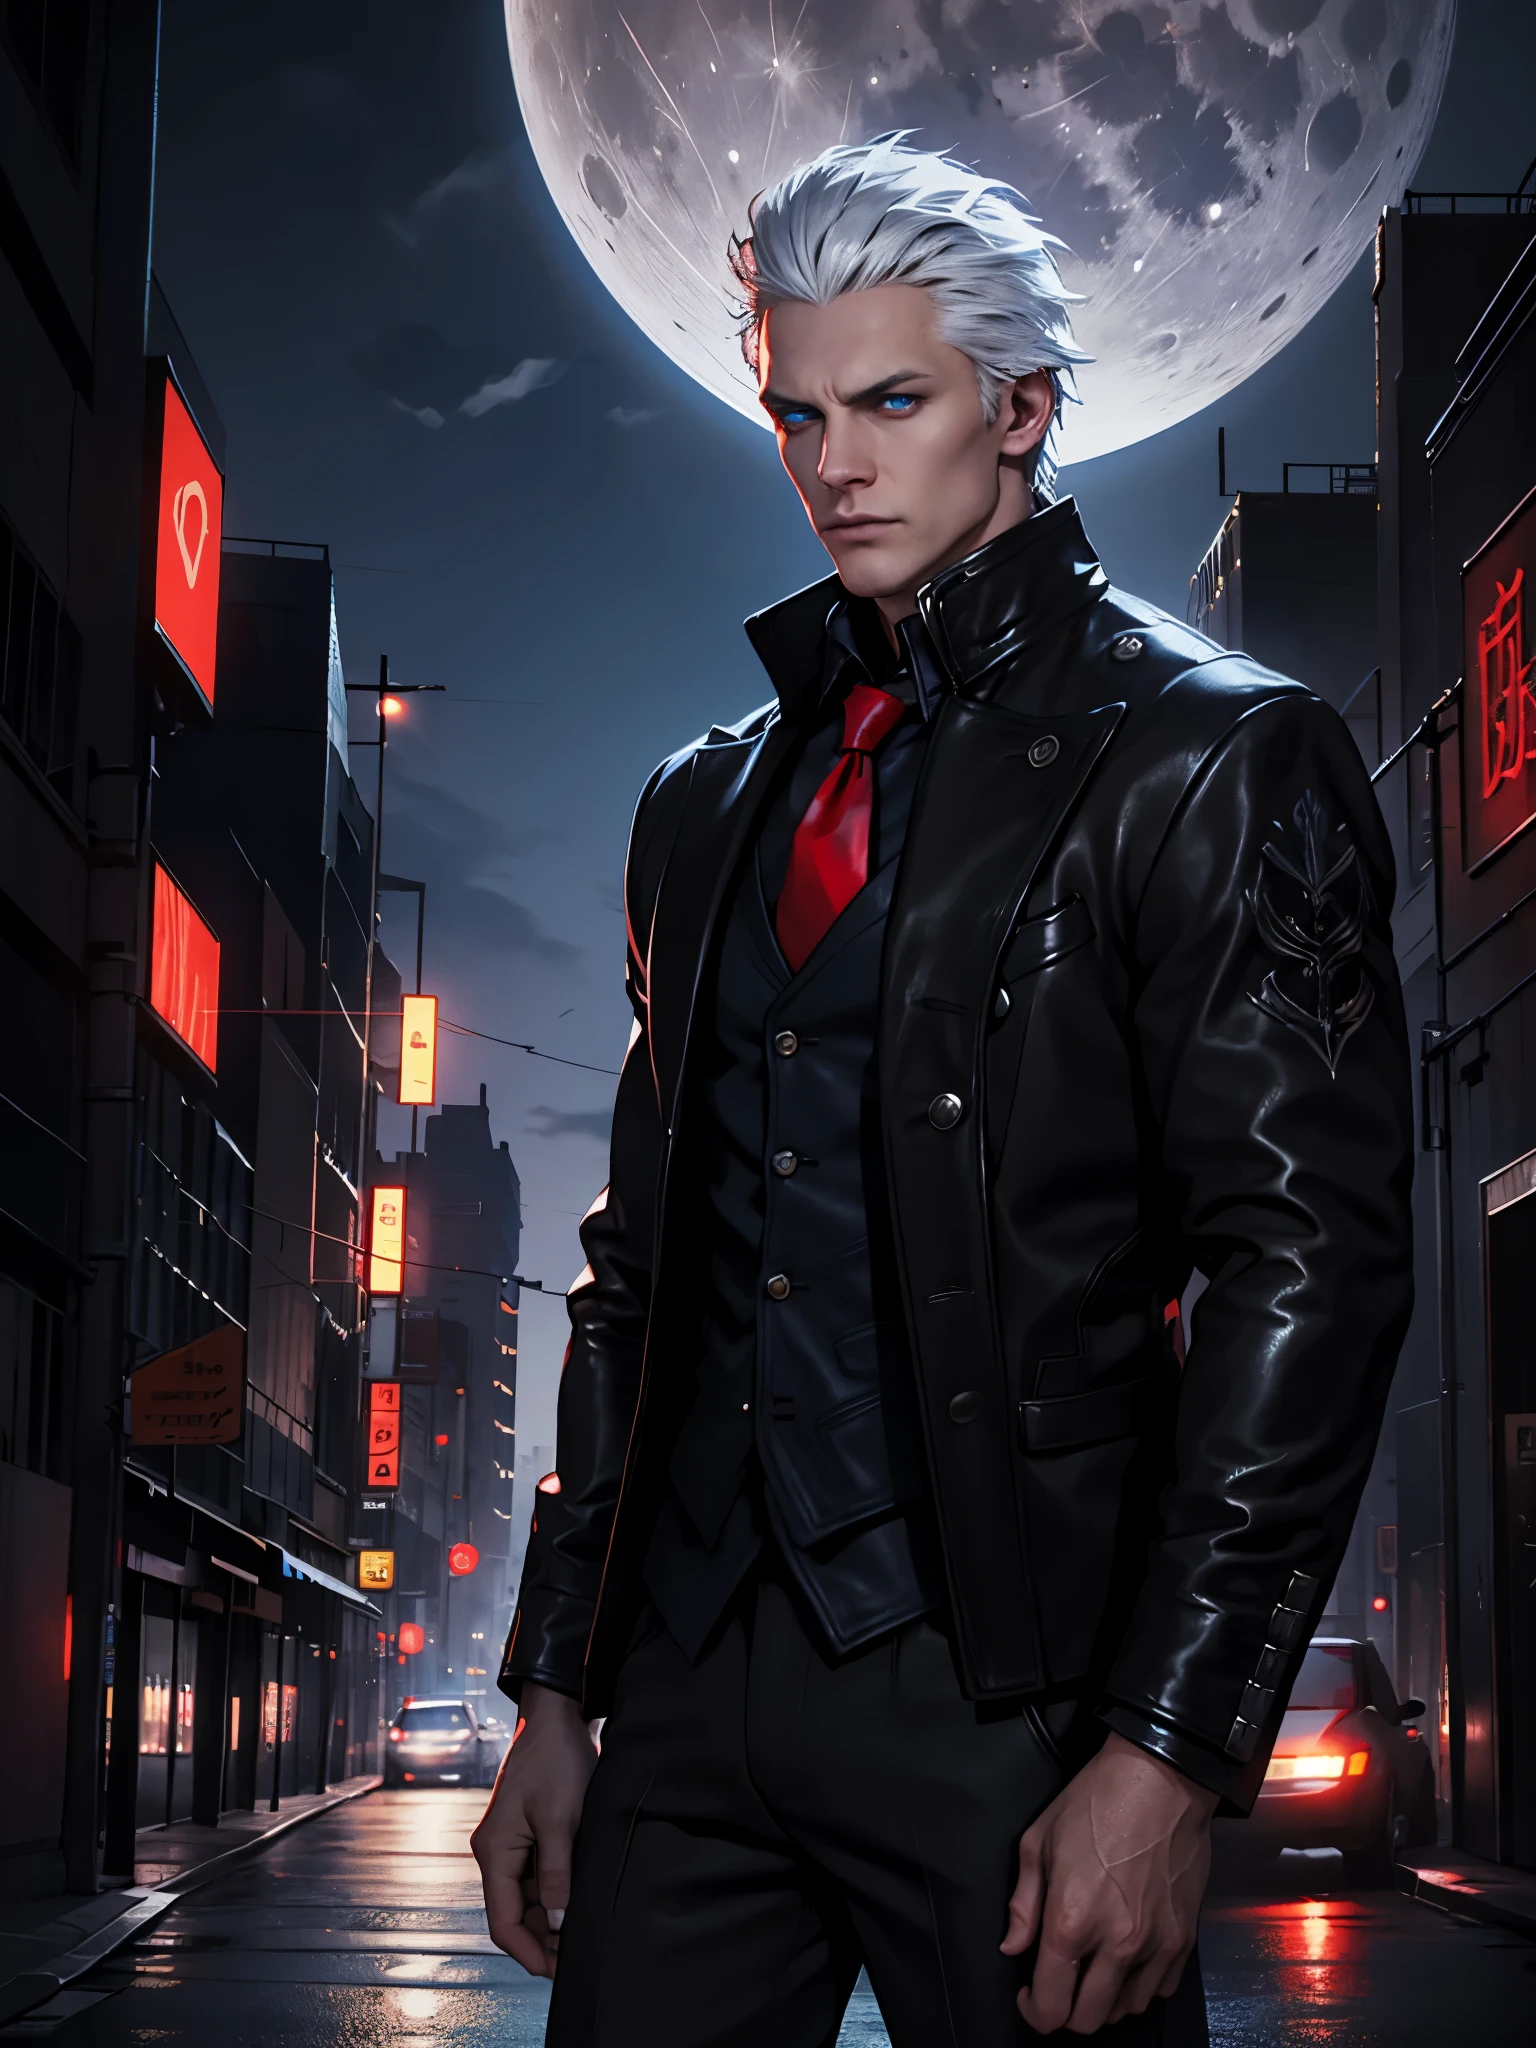 male, white hair combed back, blue eyes, black leather jacket, black shirt, red tie, red vest, detailed eye. City at night background. full moon.